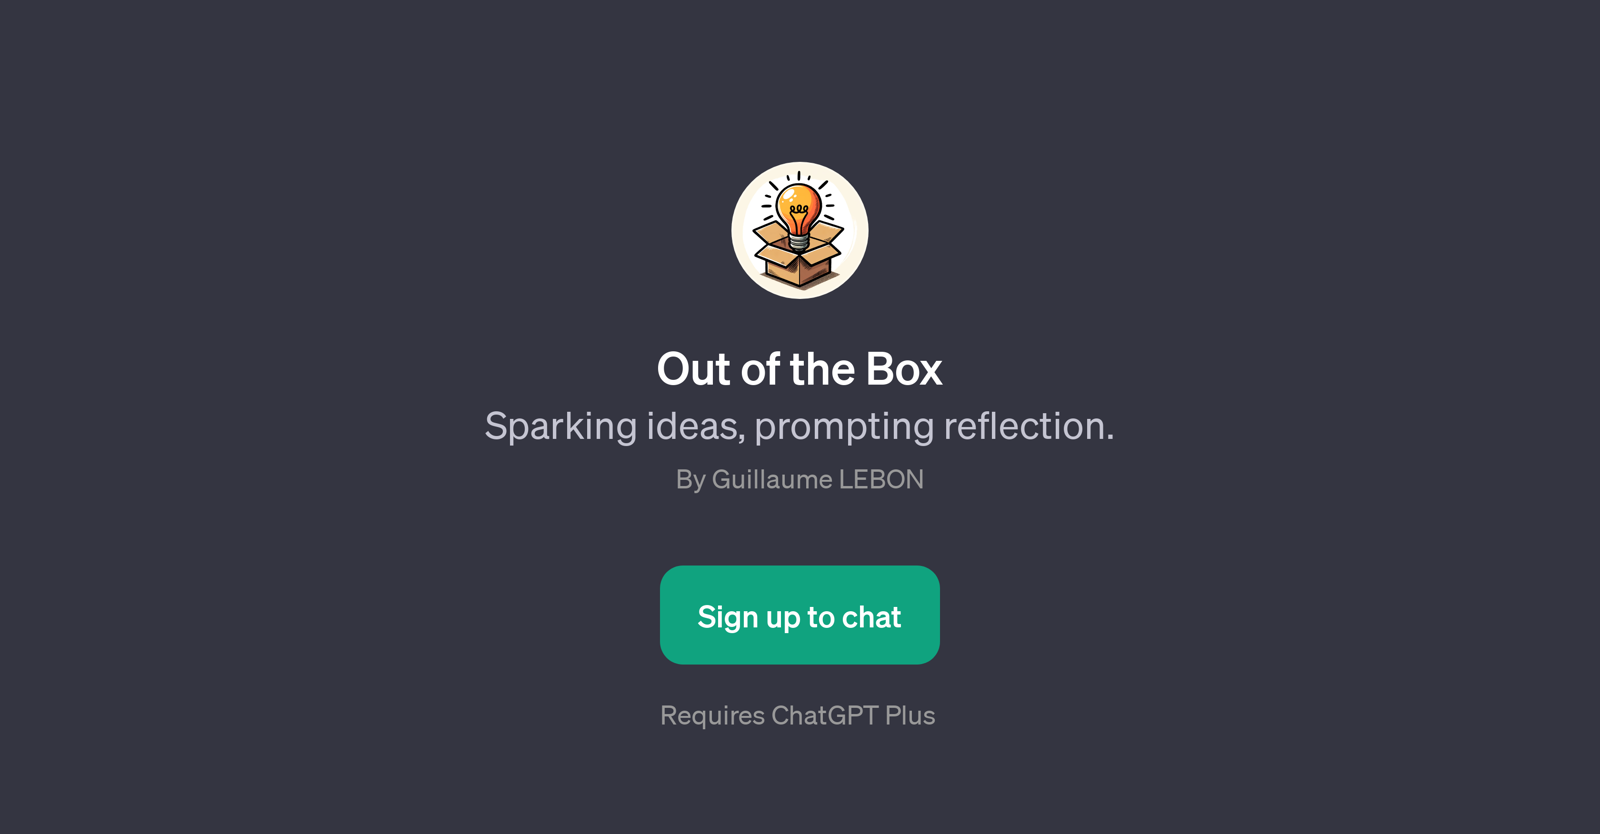 Out of the Box website